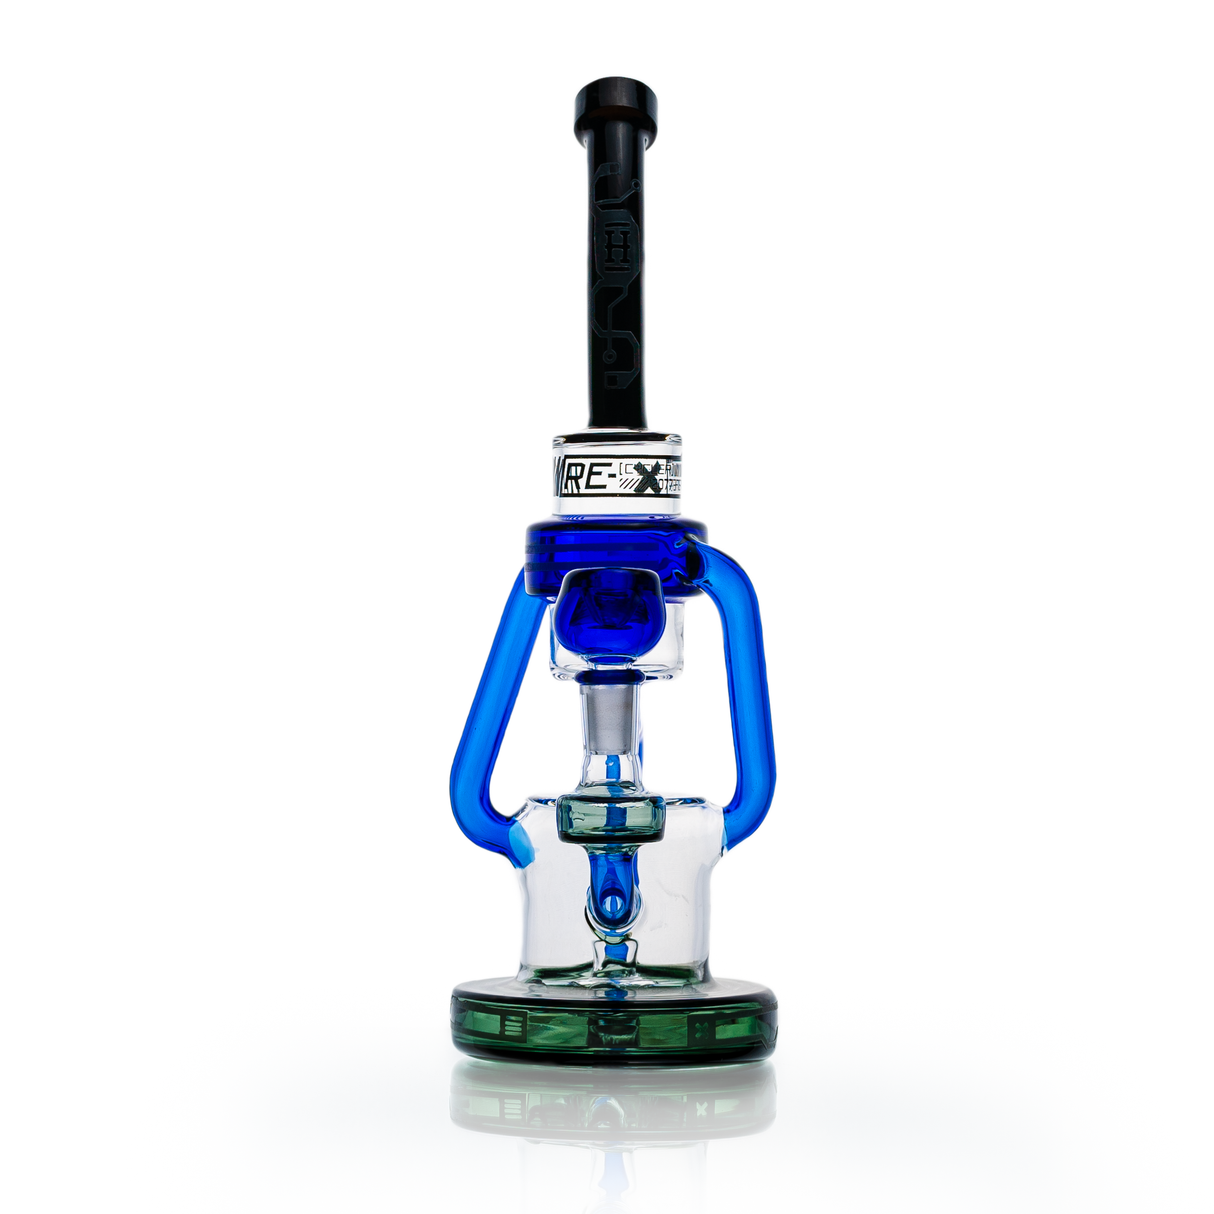 Hemper Cyberpunk XL Recycler Bong with blue accents, front view on seamless white background